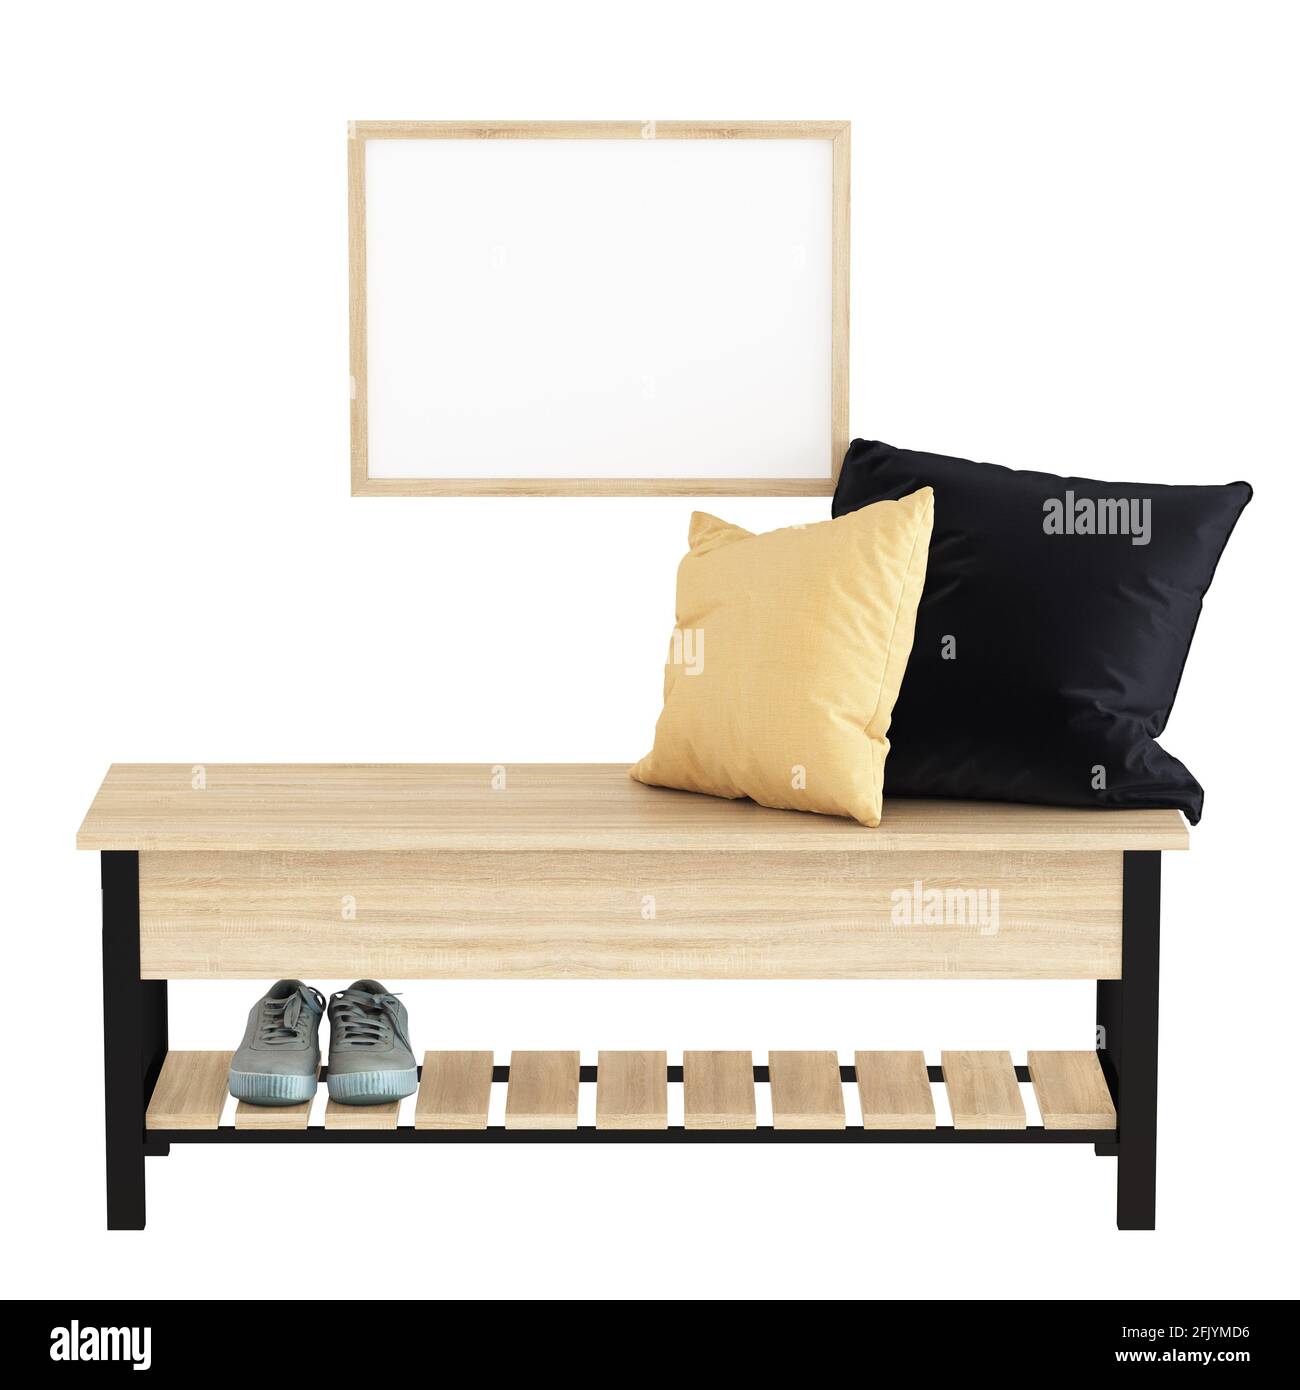 Light metal wood bench with a pillow and a pair of shoes and a frame with blank picture on an isolated background. Hallway decor. 3d rendering Stock Photo